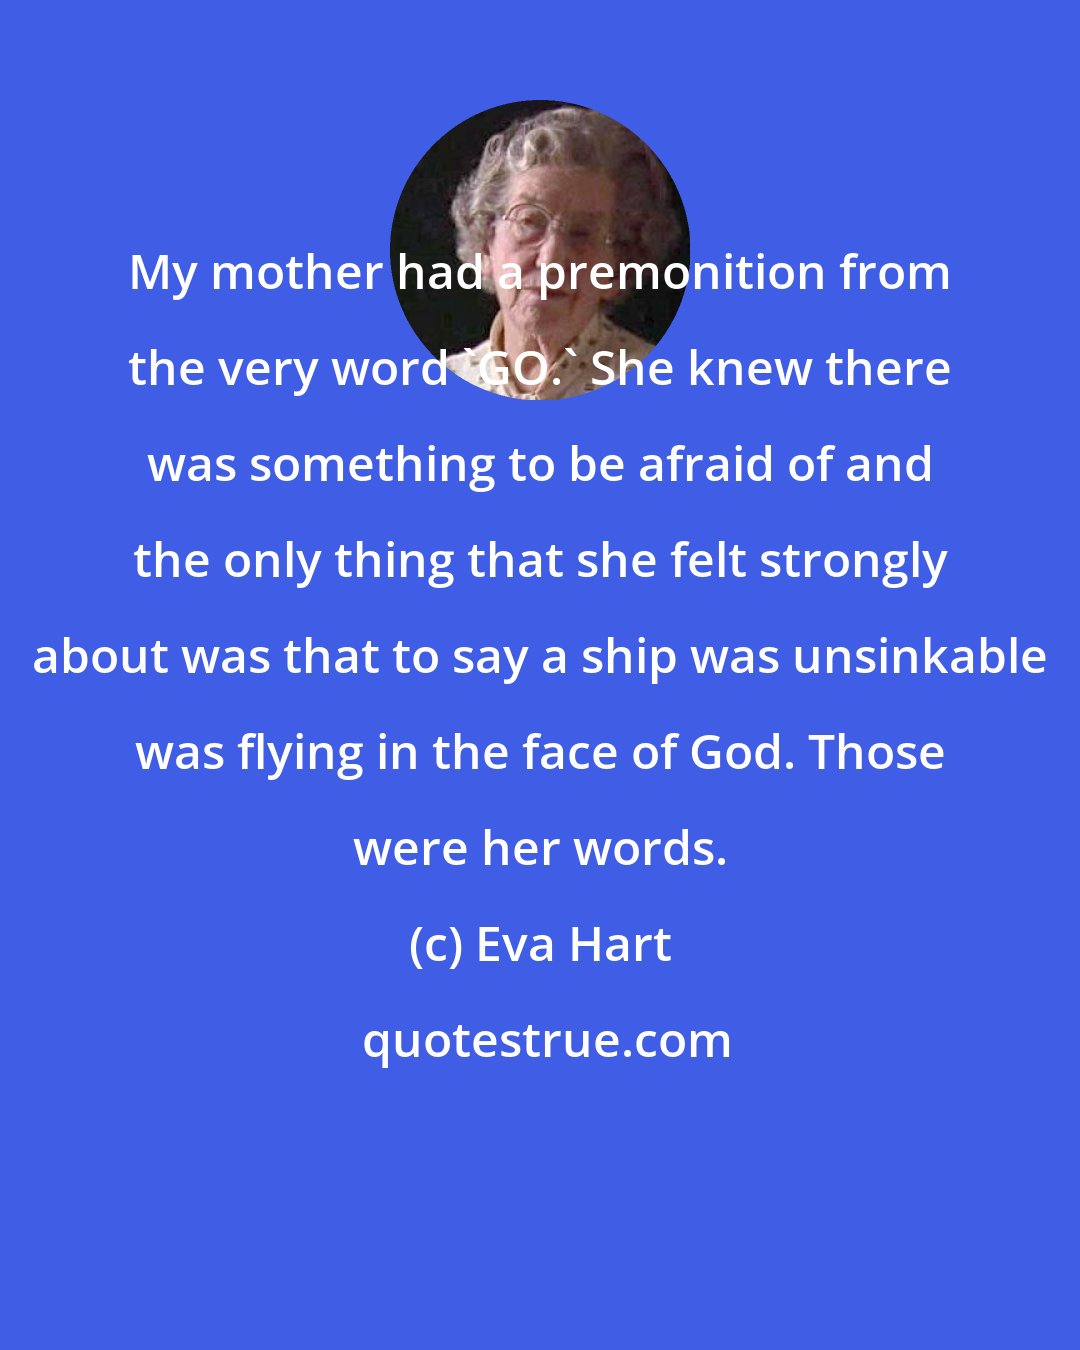 Eva Hart: My mother had a premonition from the very word 'GO.' She knew there was something to be afraid of and the only thing that she felt strongly about was that to say a ship was unsinkable was flying in the face of God. Those were her words.